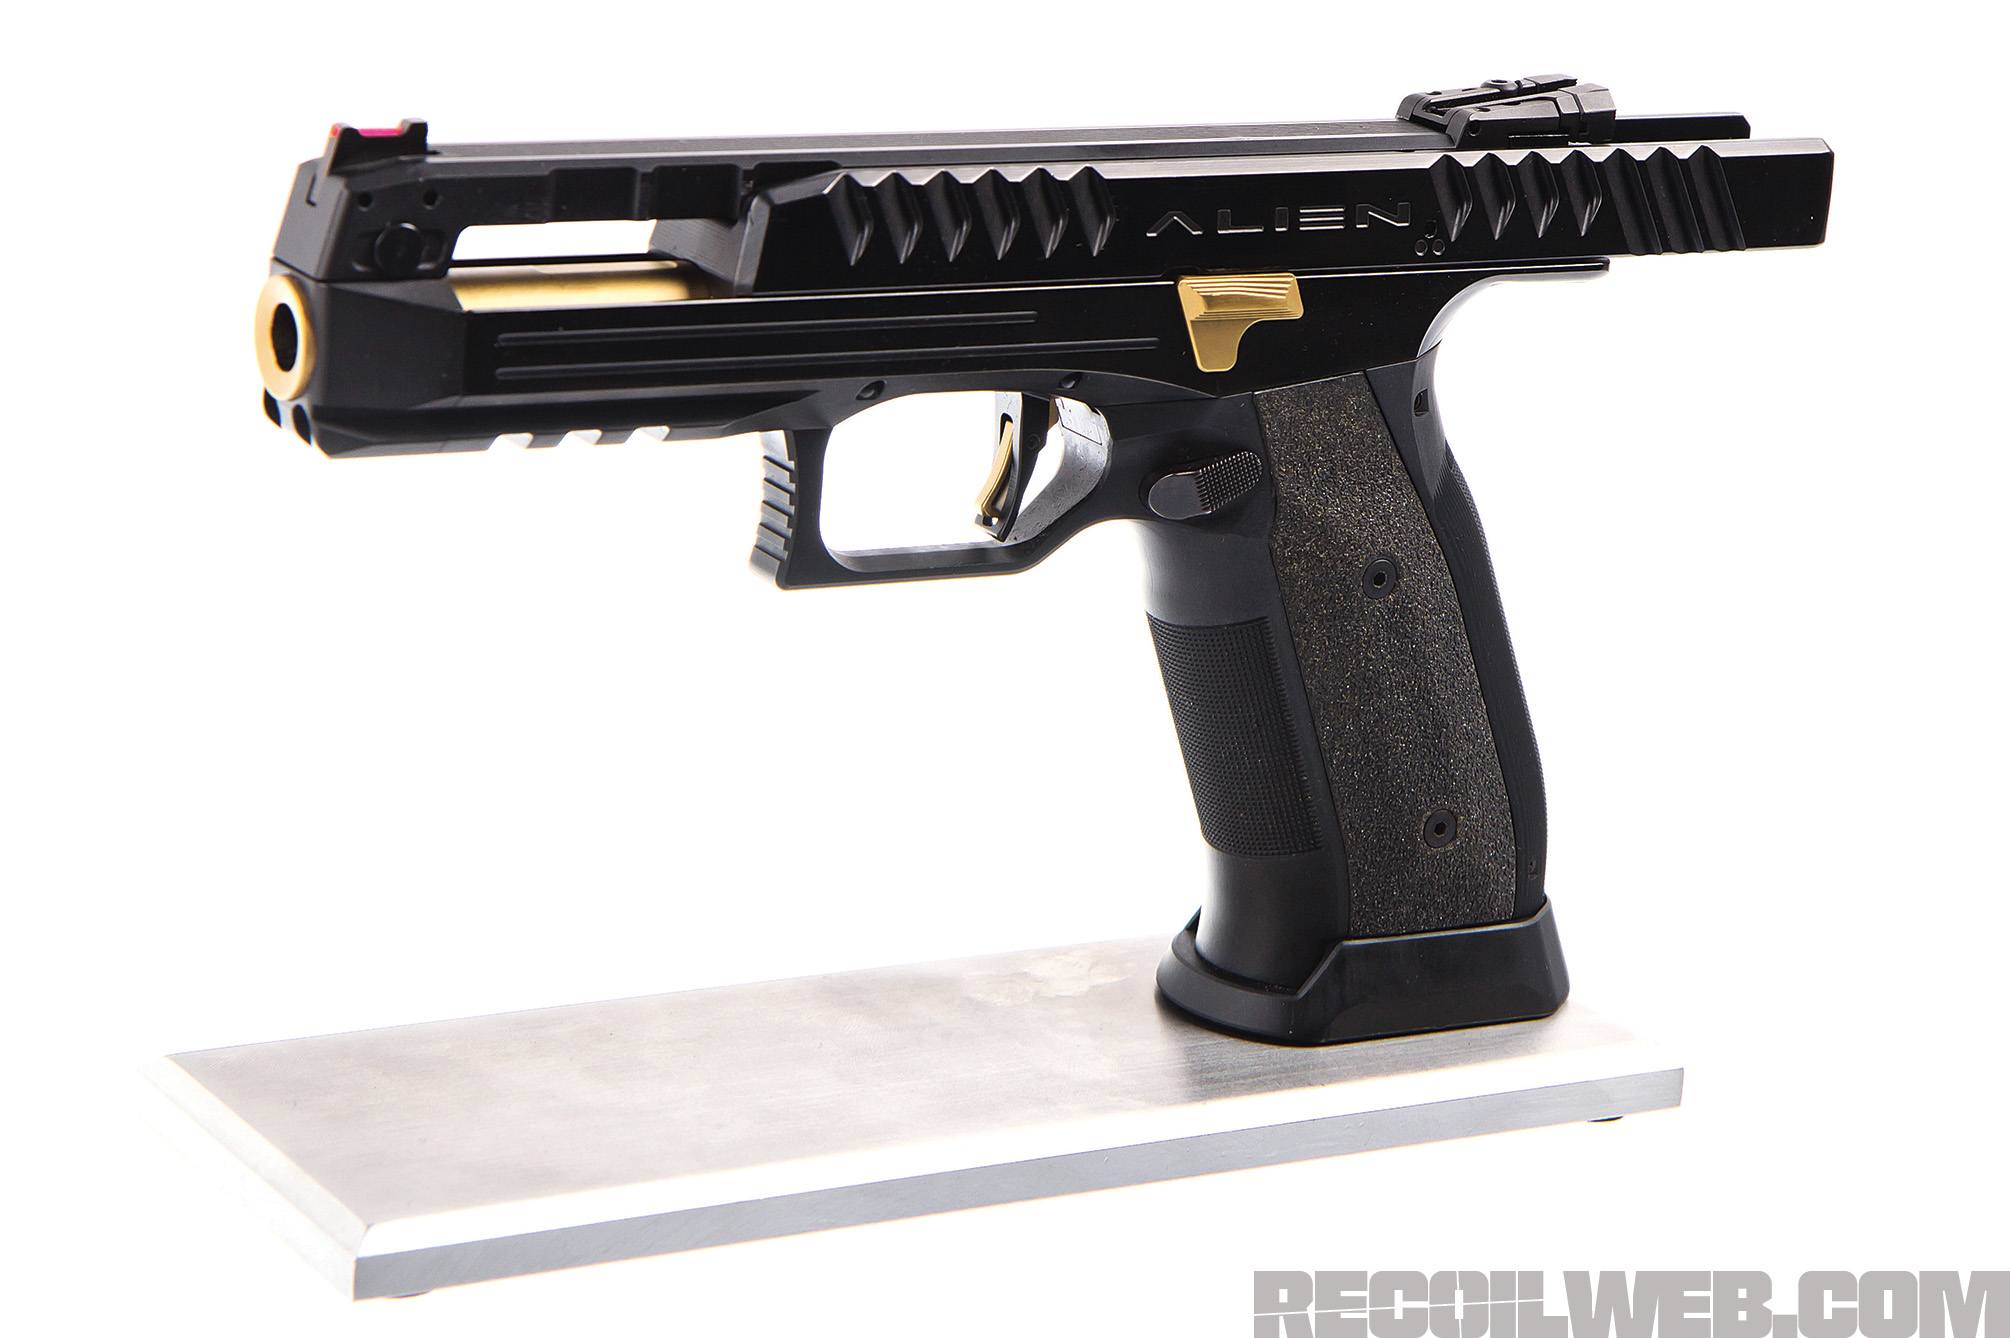 RECOIL EXCLUSIVE: Alien Pistol from Laugo Arms, the Full Review | RECOIL